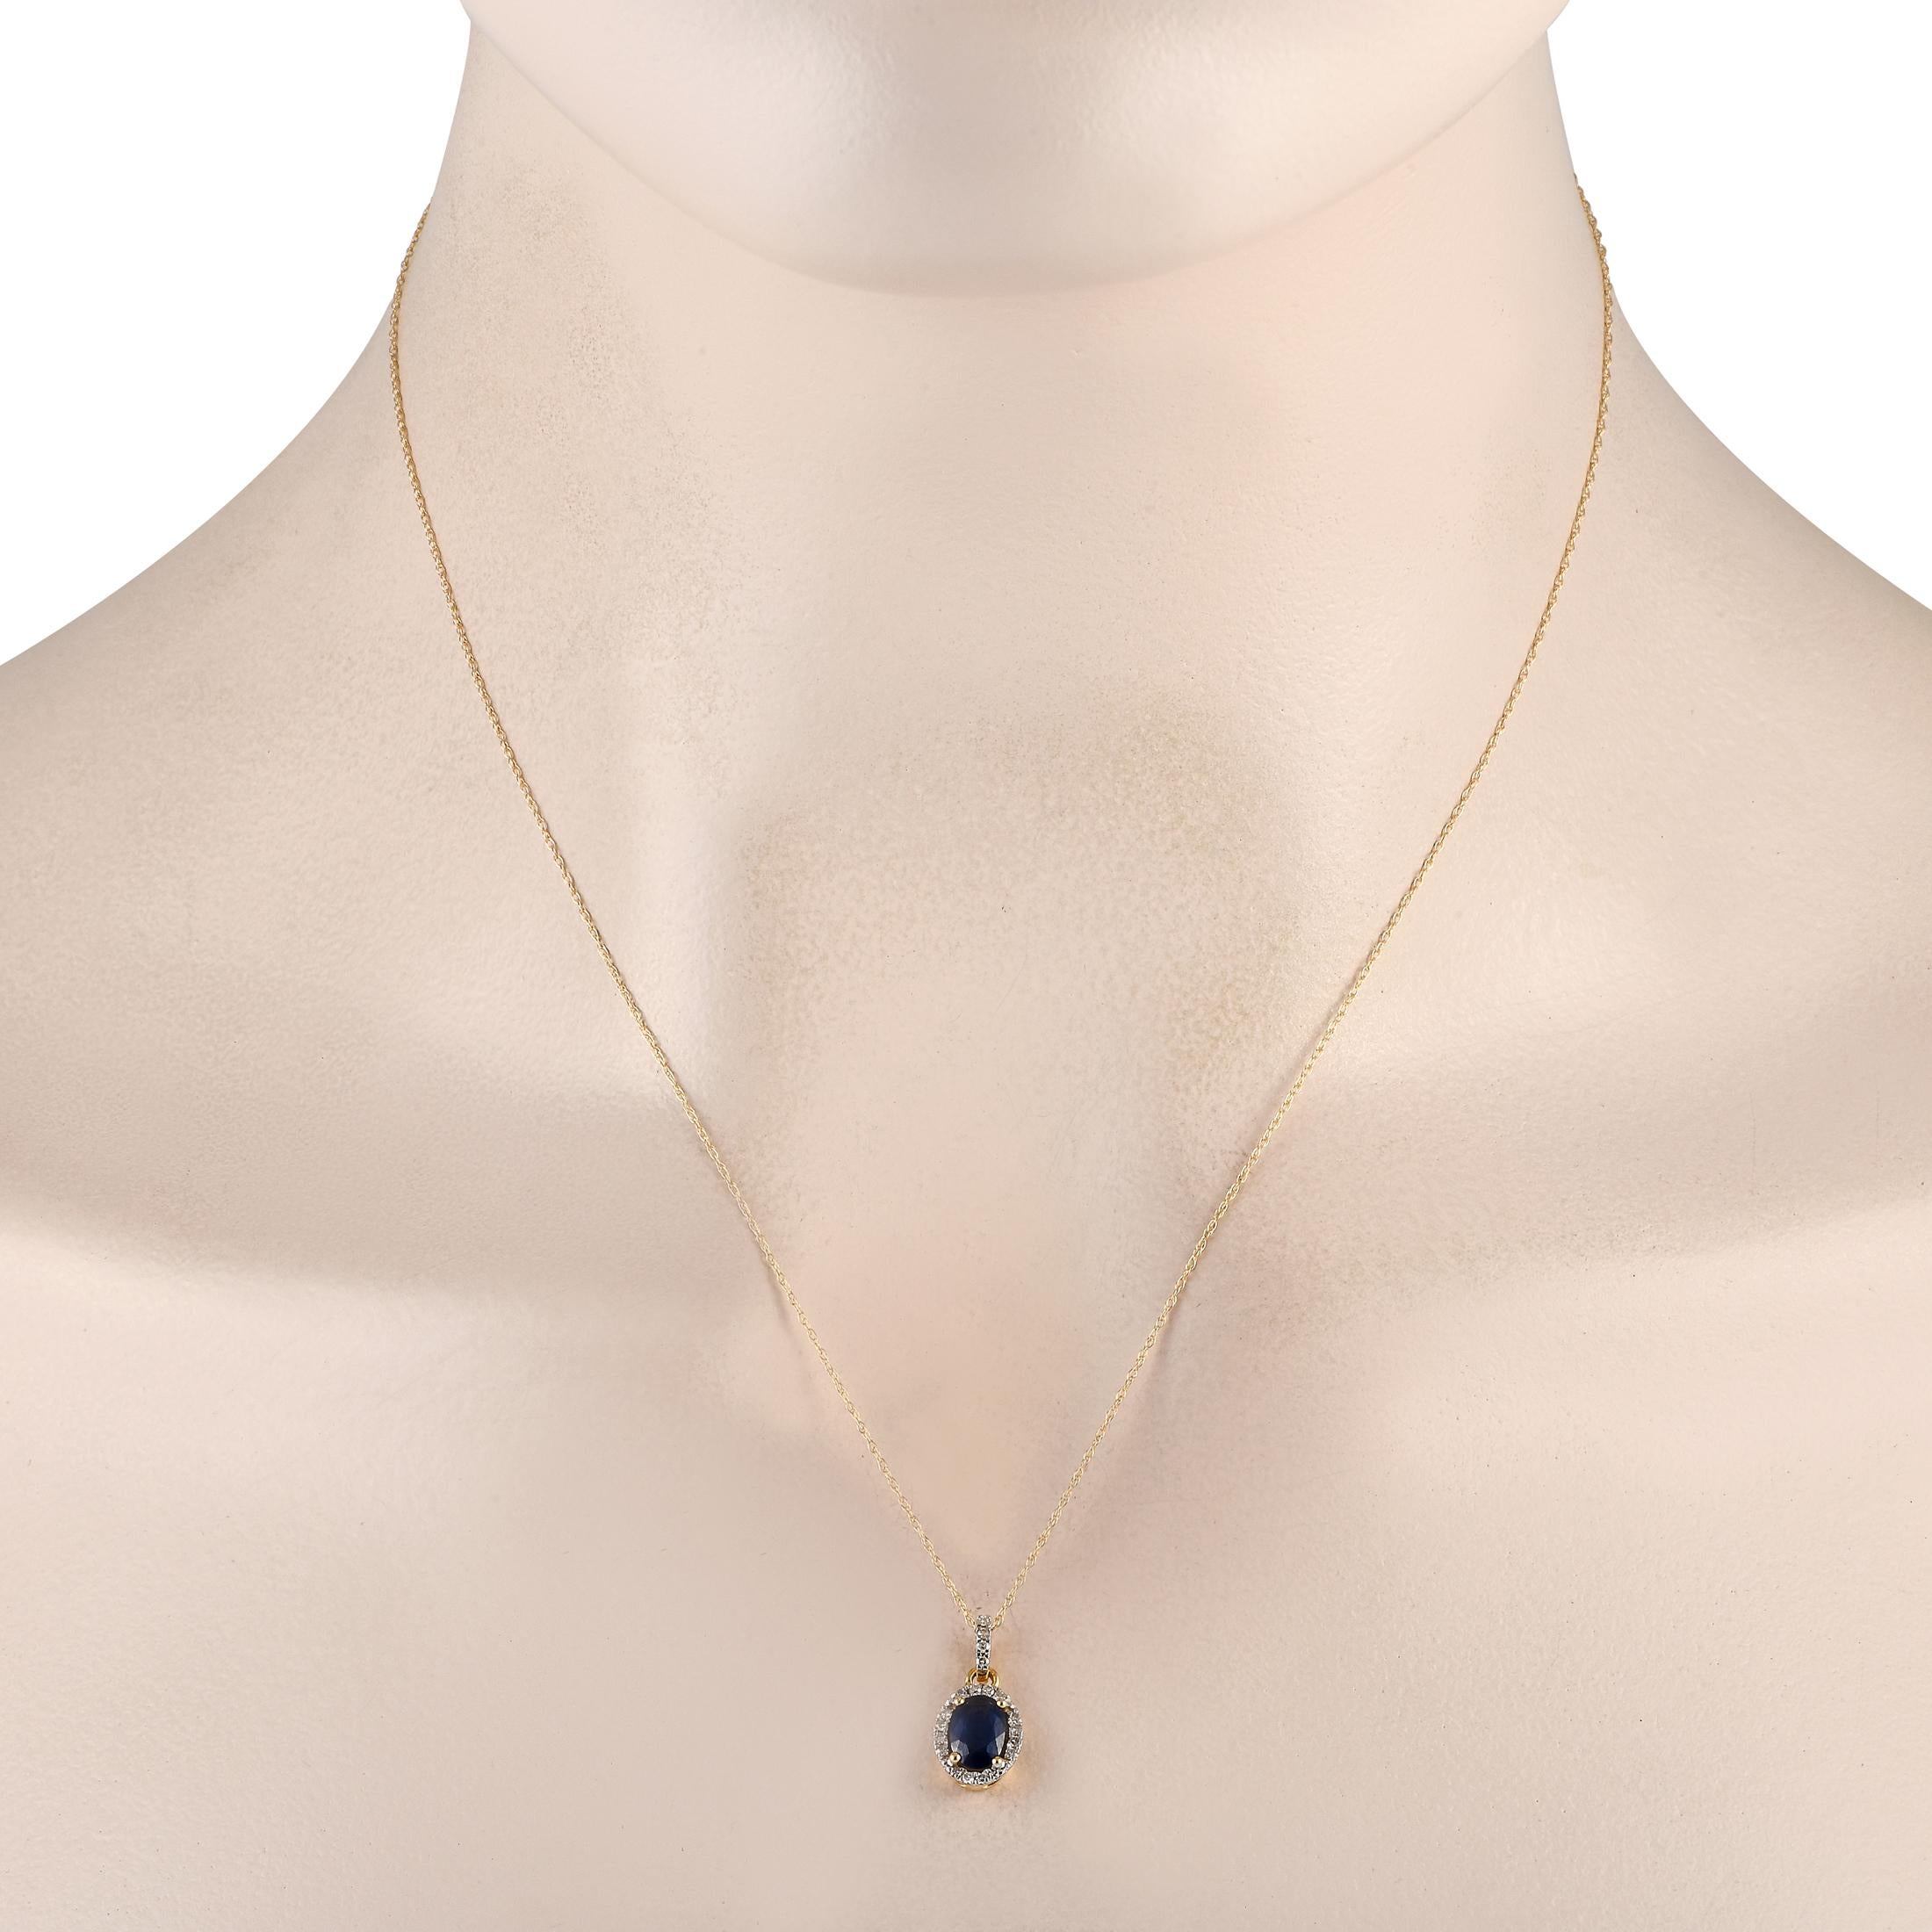 An oval-shaped Sapphire gemstone makes a statement at the center of this necklaces 14K Yellow Gold pendant. Suspended from an 18 chain, the pendant measures 0.65 long by 0.25 wide and comes to life thanks to additional Diamond accents totaling 0.10